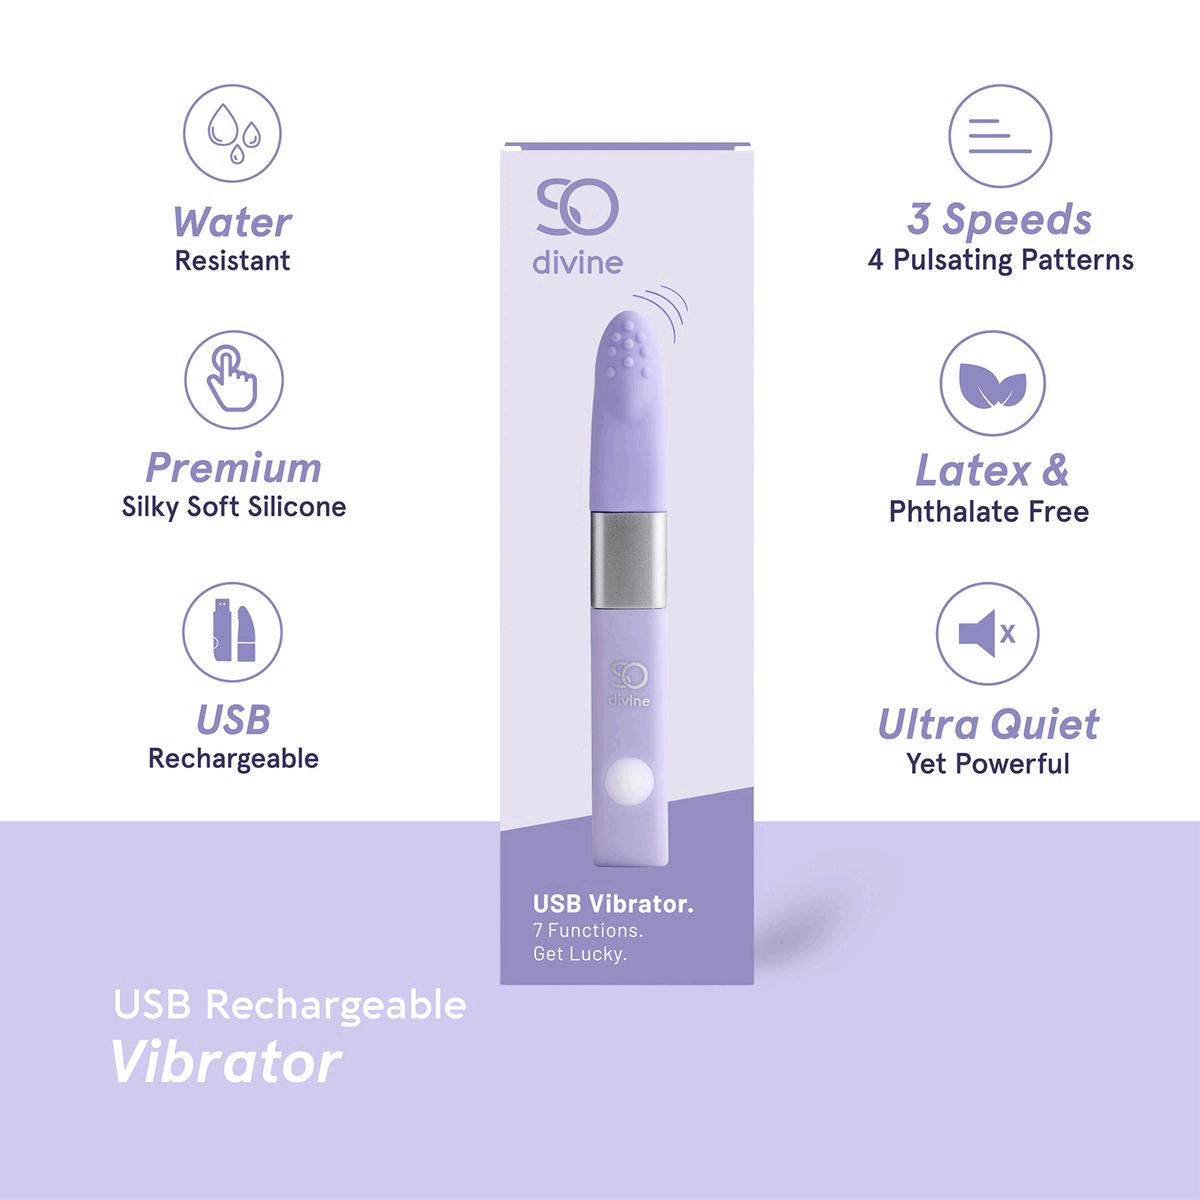 Three images transitioning into each other in an endless loop. Image 1: Water Resistant. 3 speeds 4 pulsating patterns. Premium silky soft silicone. Latex and phthalate free. USB rechargeable. Ultra quiet yet powerful. USB rechargeable vibrator. Image 2: Charge on the go. Don't let the pleasure stop, with easy USB recharging. Image 3: Ultra quiet, yet powerful.